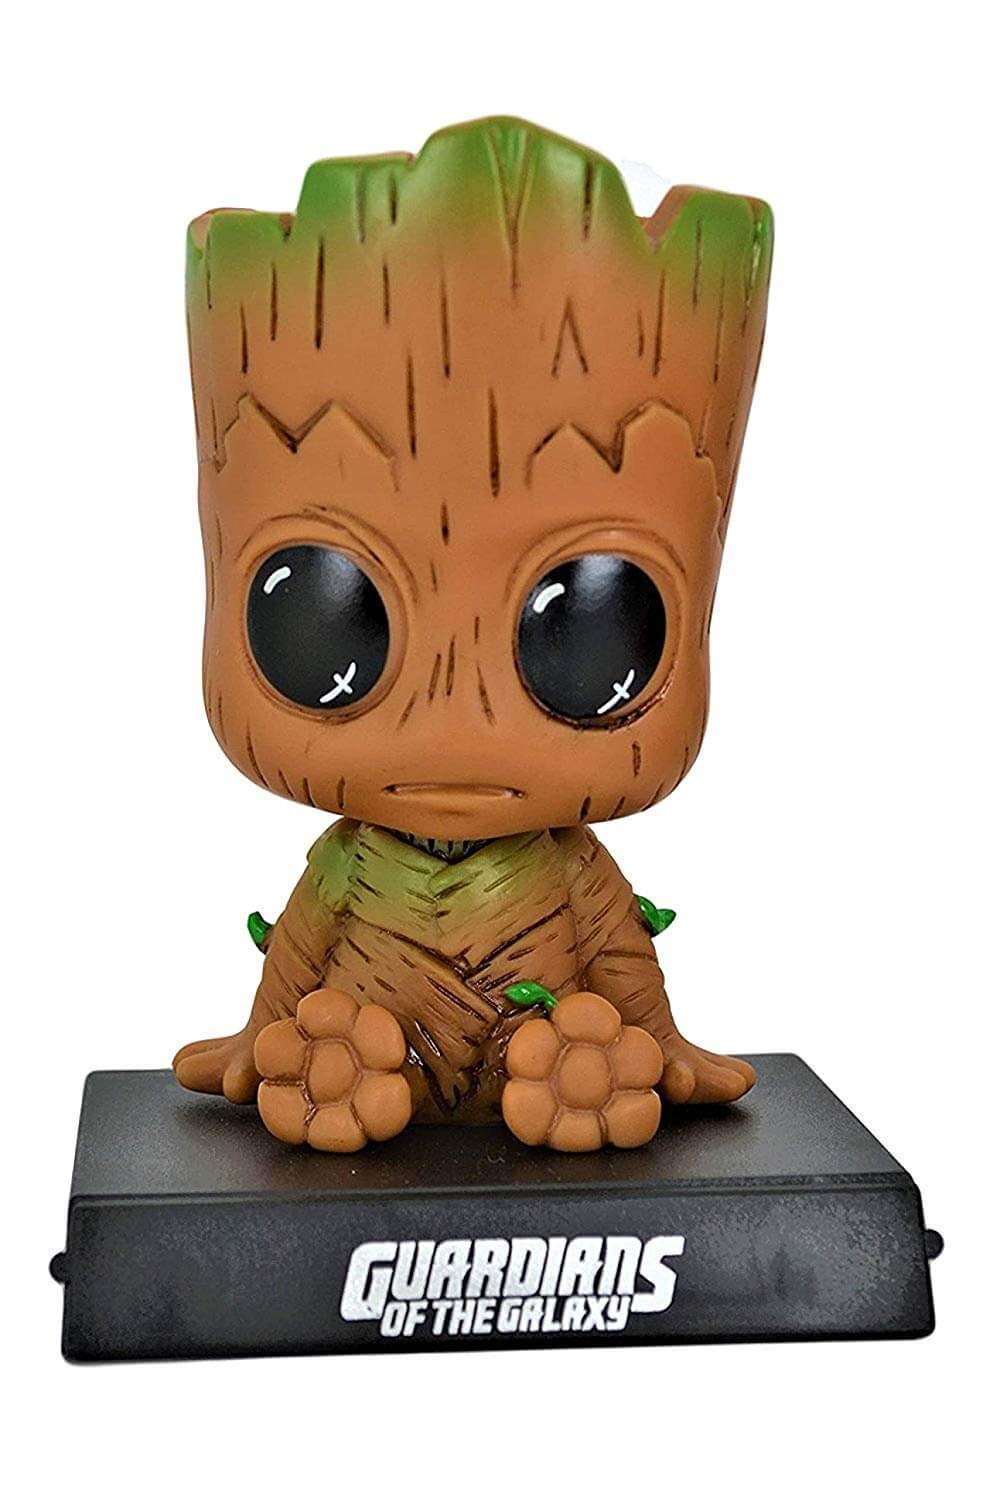 RaJ Avengers Big Size Bobble Head   Action Figure with Mobile Holder for Car Dashboard and Office Desk  Groot 